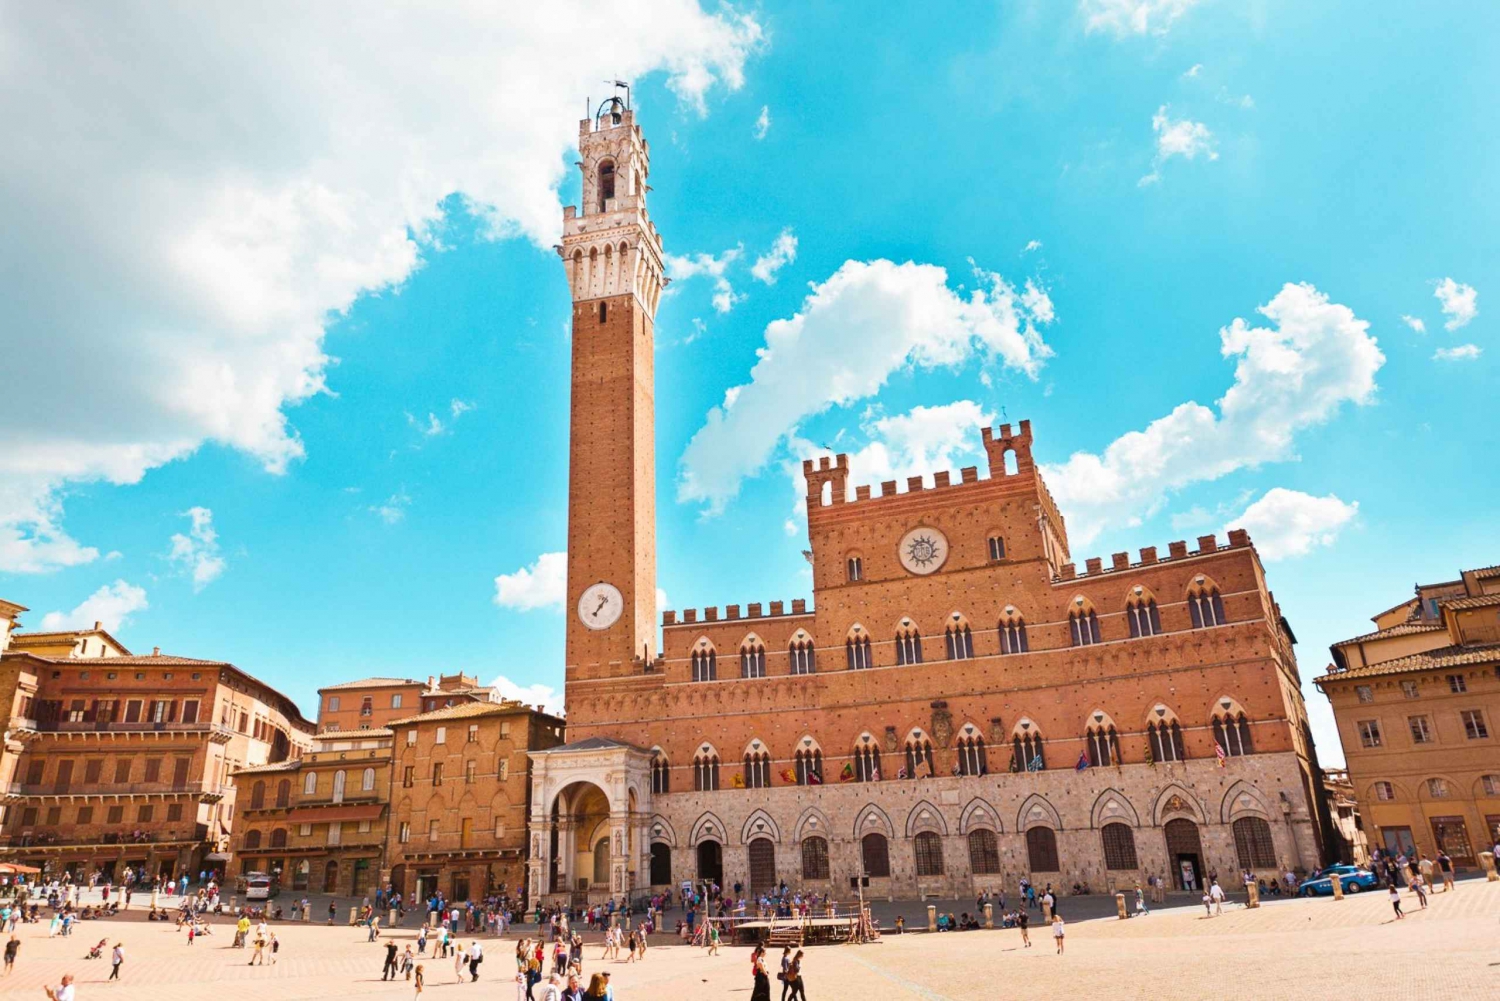 Siena Half-Day Tour from Florence